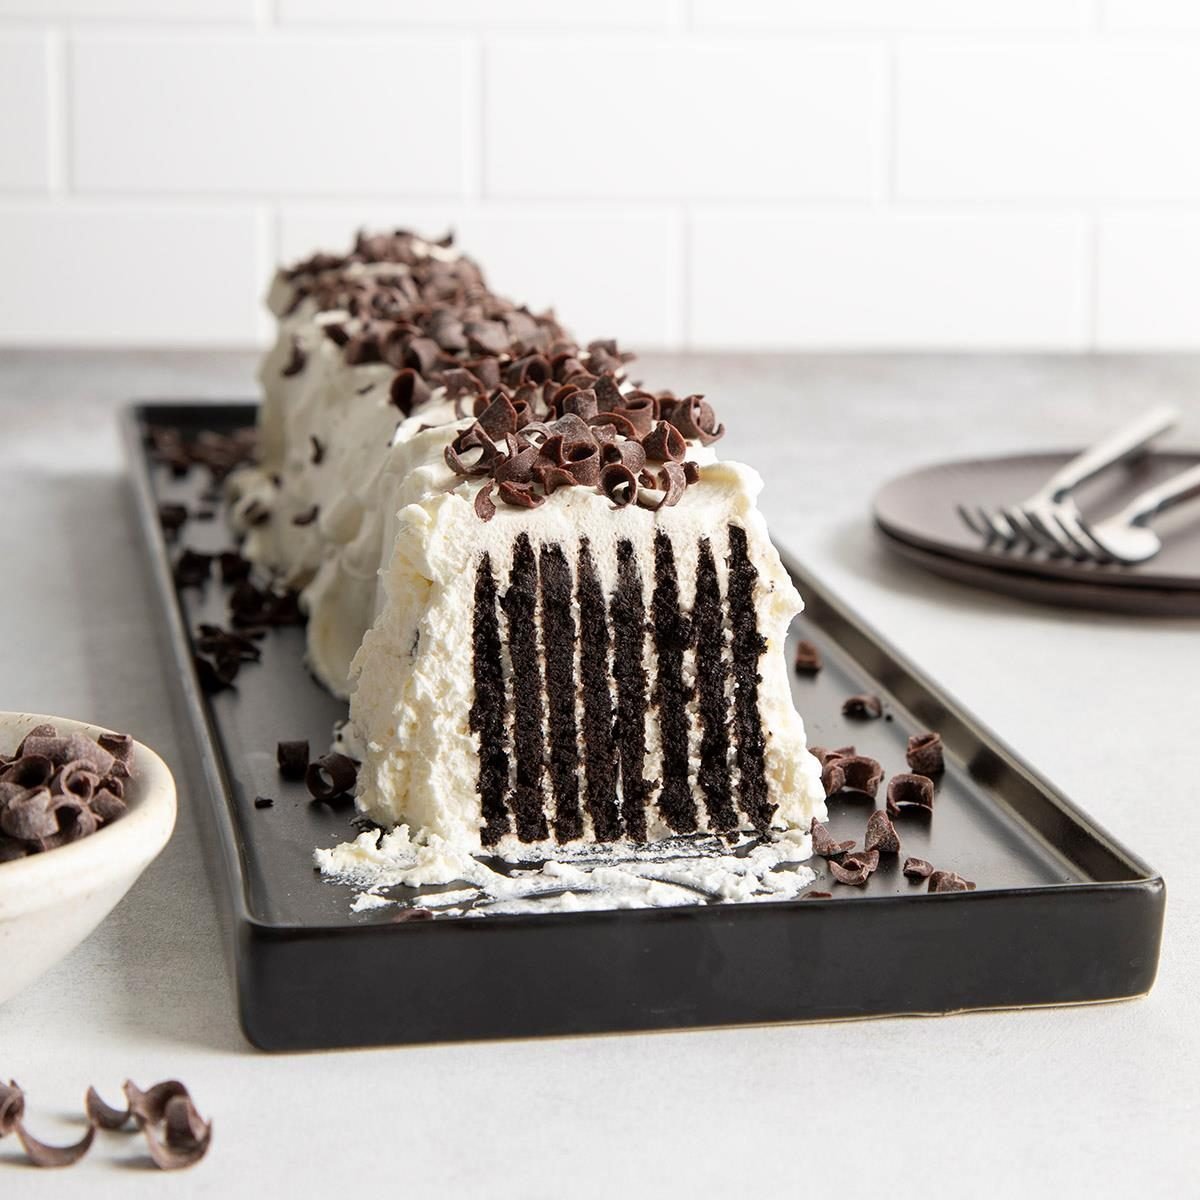 30 Icebox Cakes to Make Your Next Summer Party Unforgettable